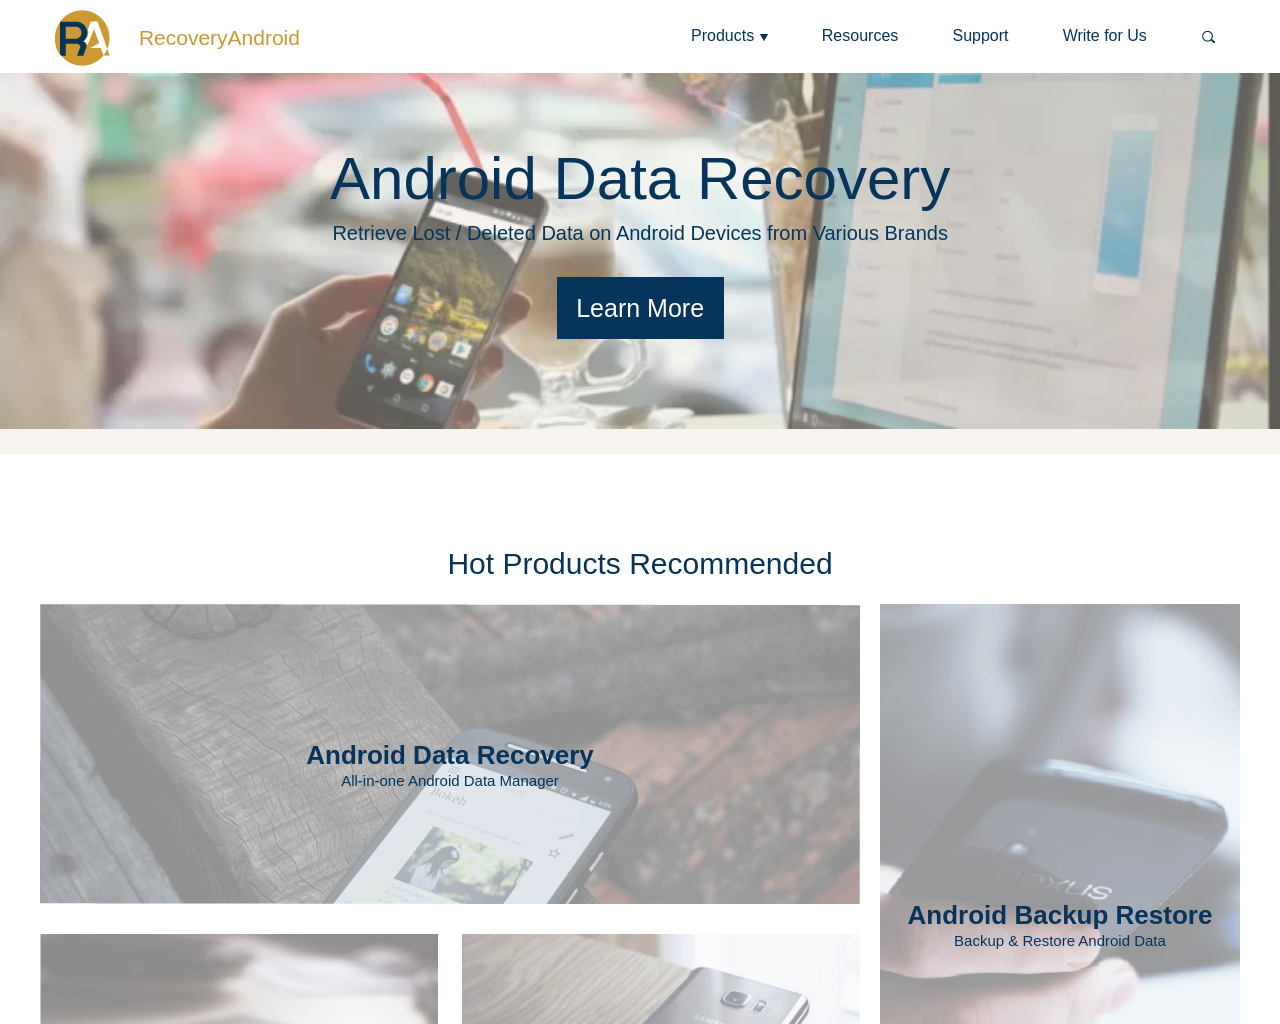 recovery-android.com